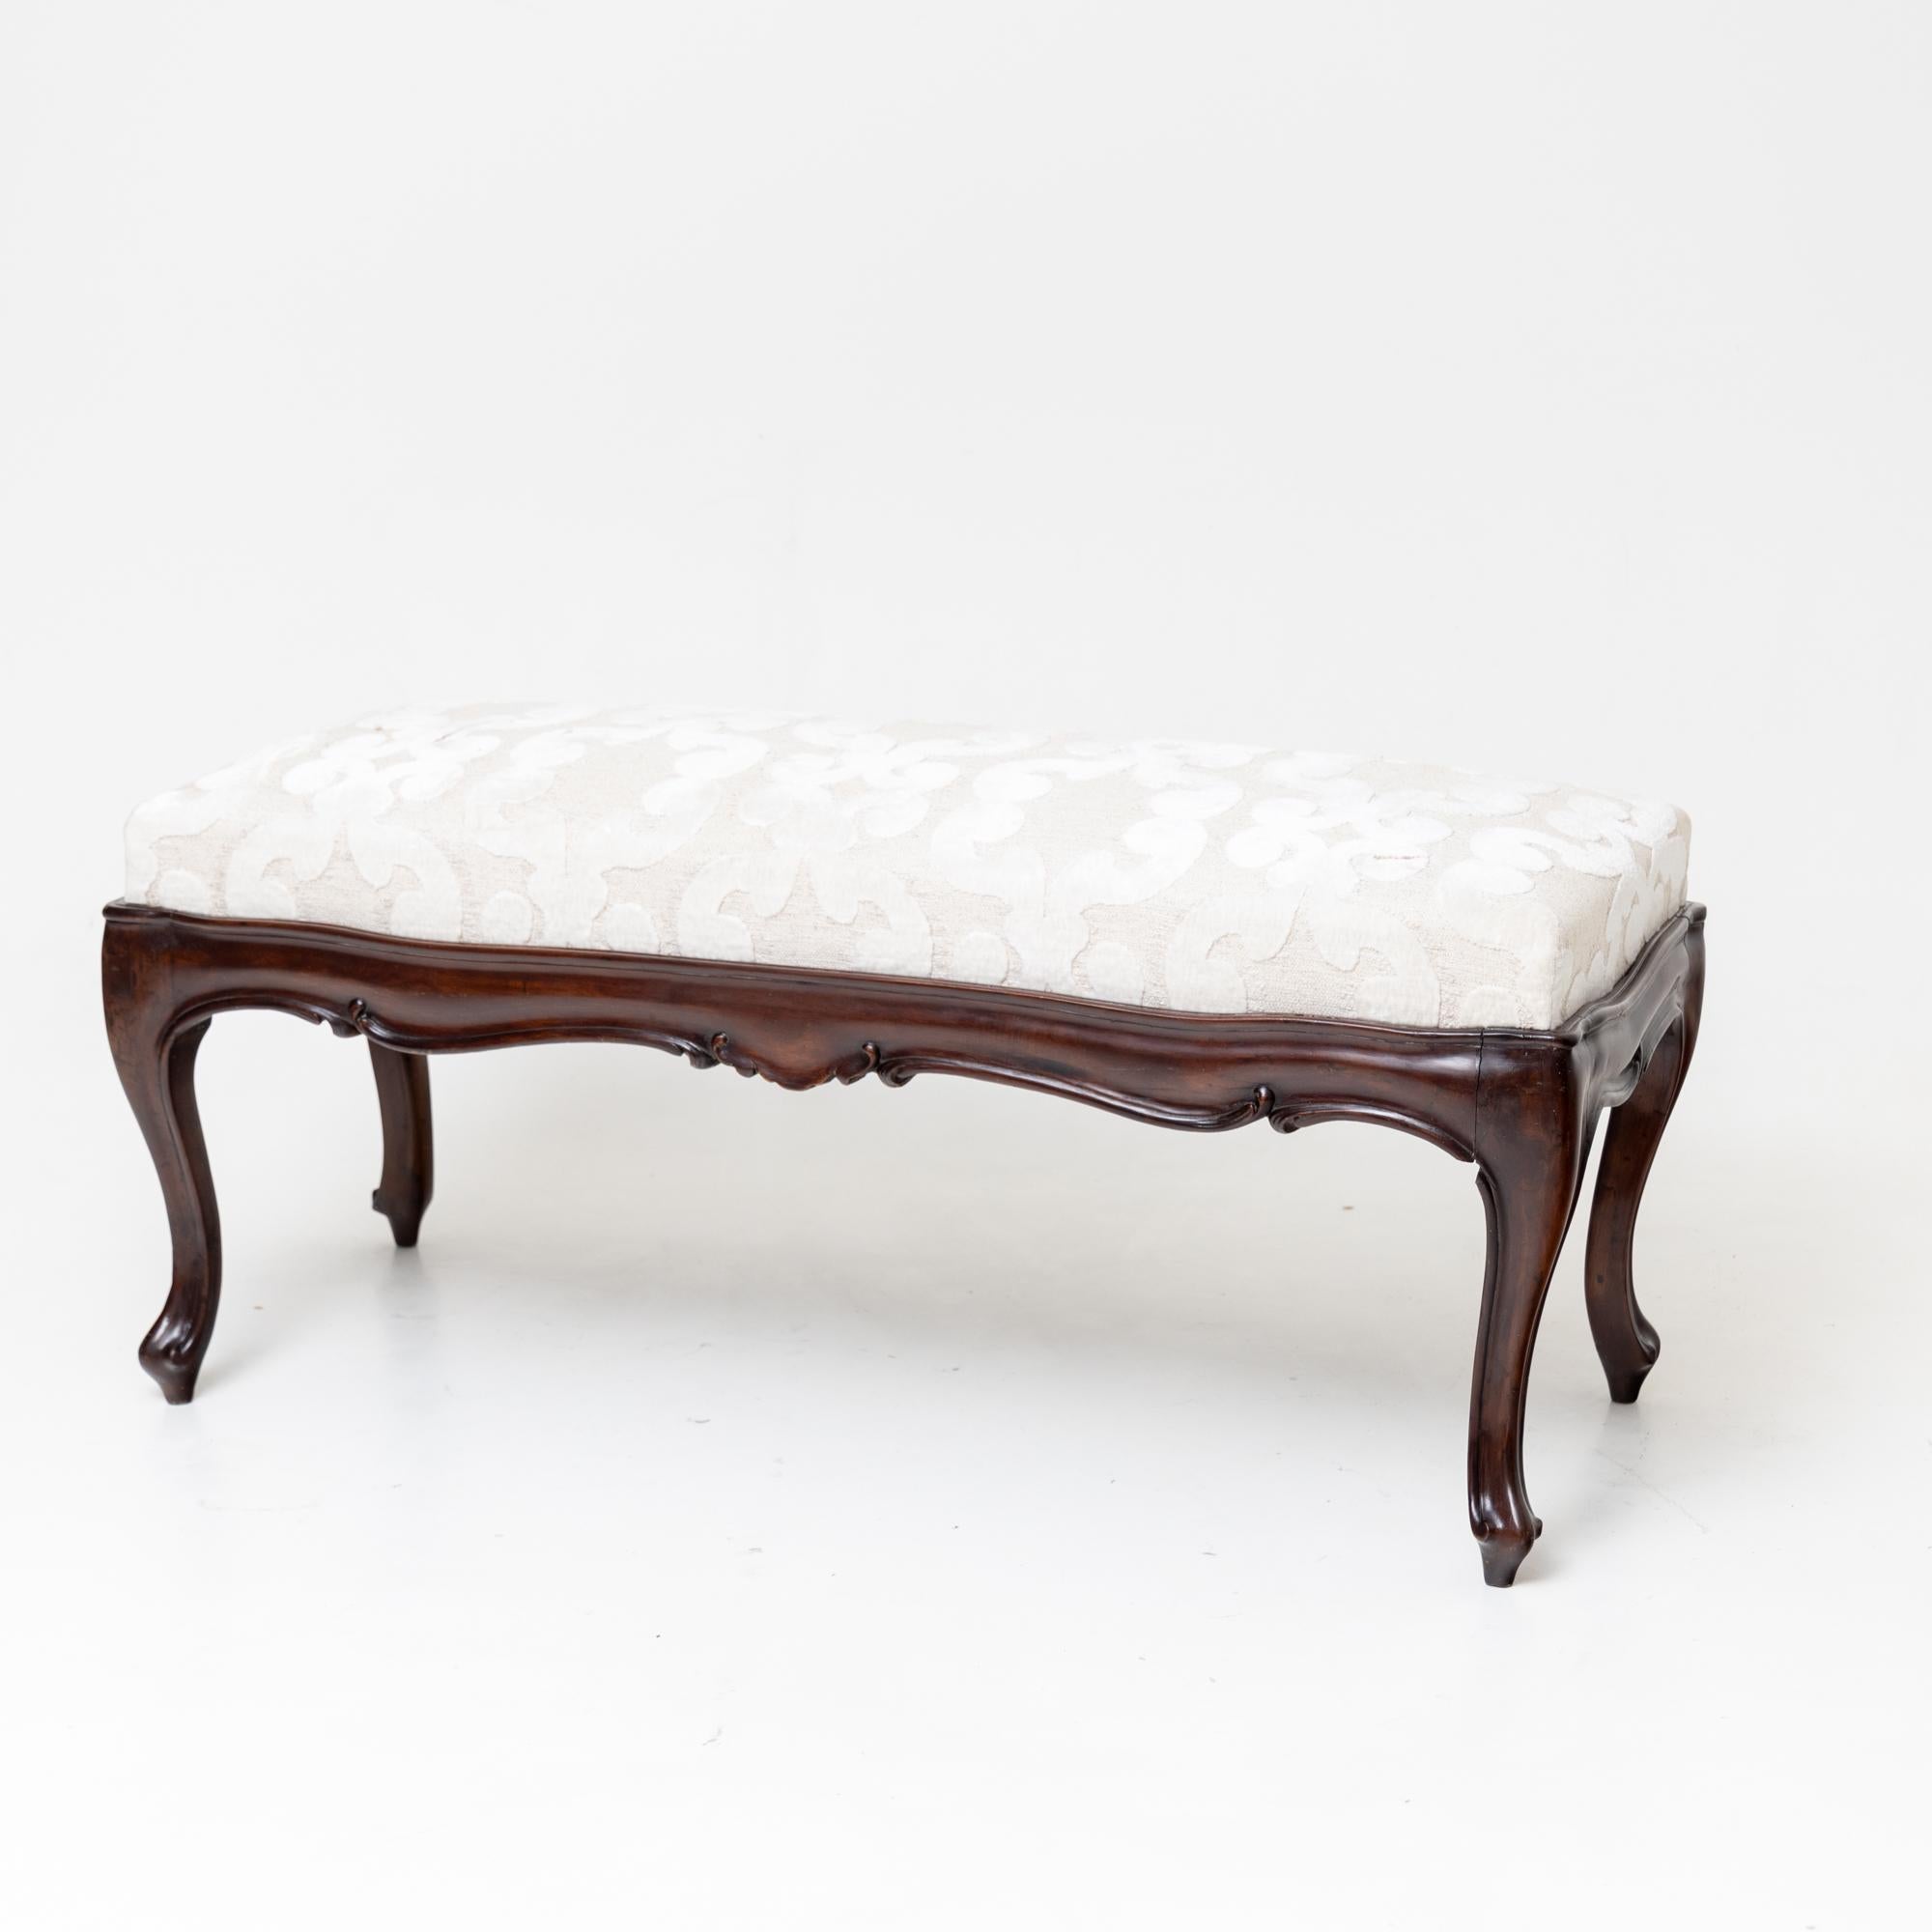 Fabric Upholstered Baroque-style Bench, 19th Century